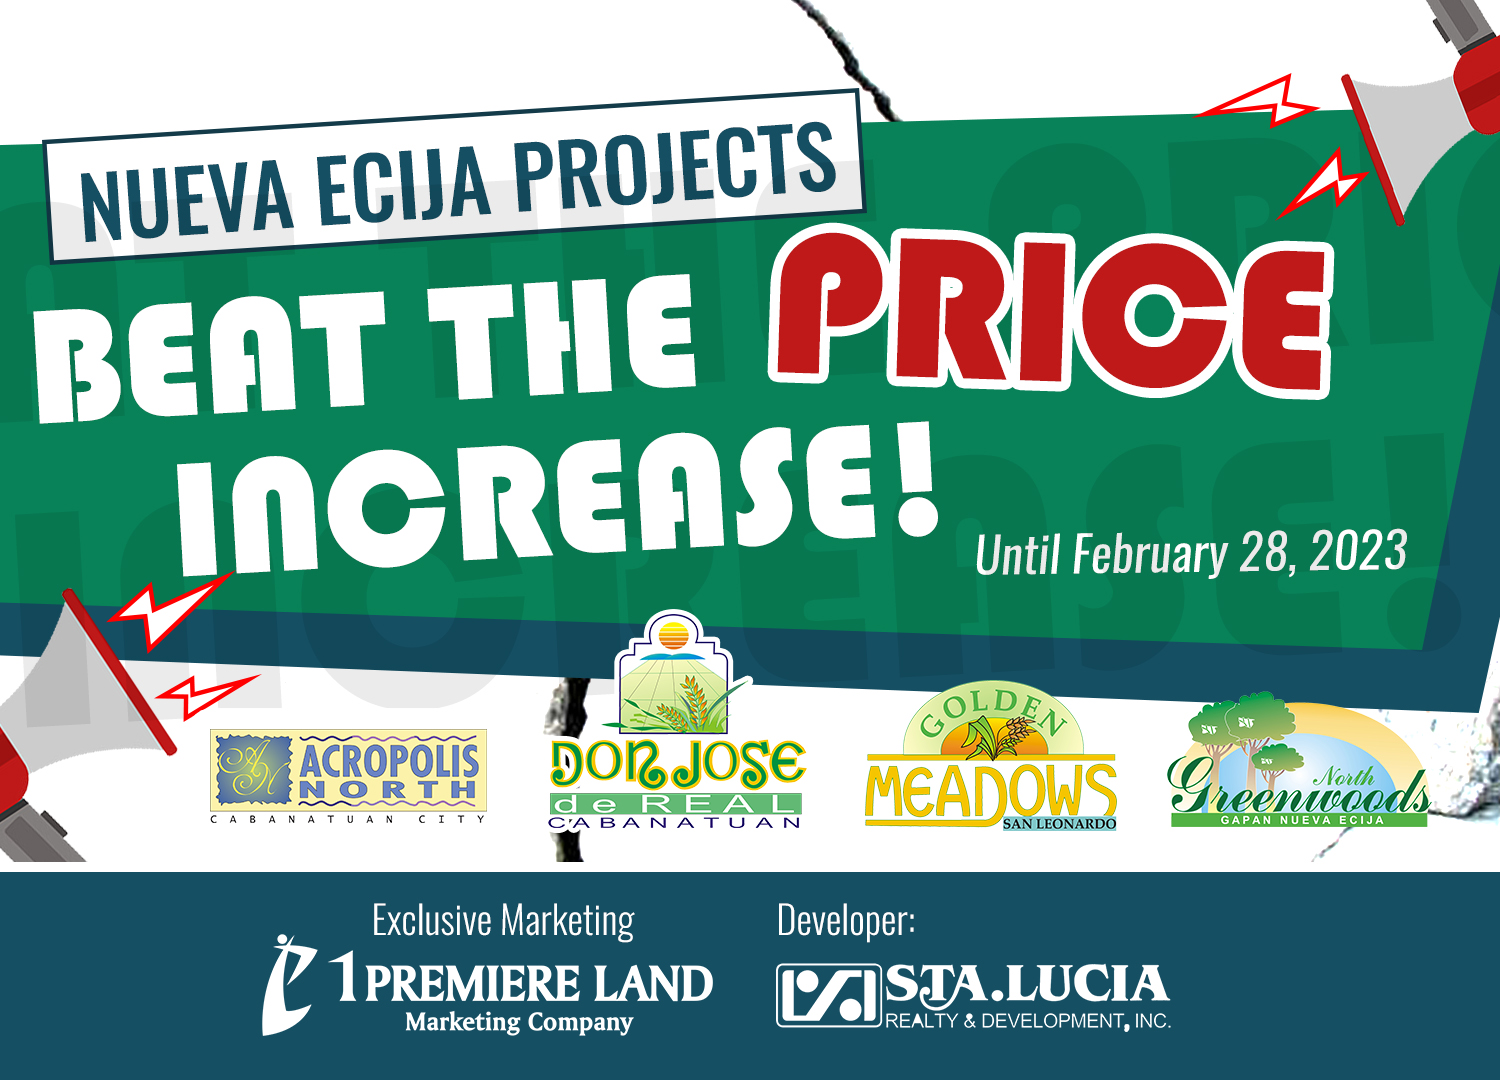 Nueva Ecija Projects Hurry up! Beat the price increase!